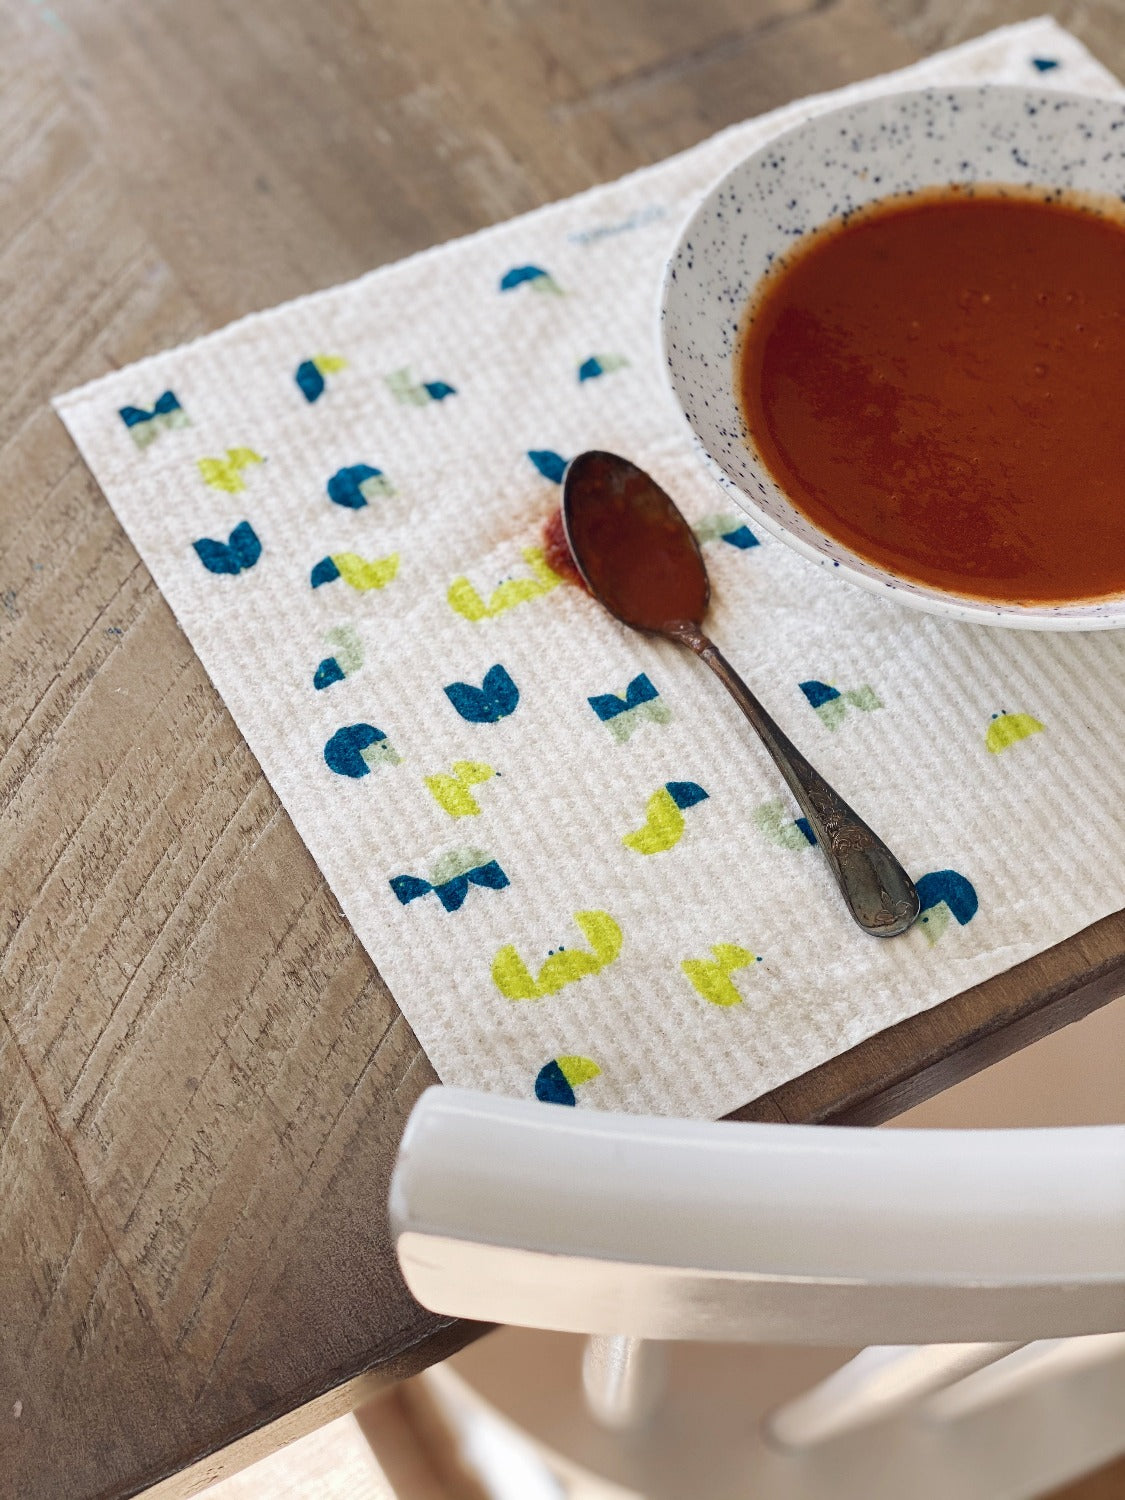 Product image of LARGE Geo Animal Sponge Cloth Mat. In this image there is a wooden table with a Large Geo Animal Sponge cloth being used as a placemat. There is a bowl of red soup with a metal spoon beside it. There is a white chair tucked in to the table. 